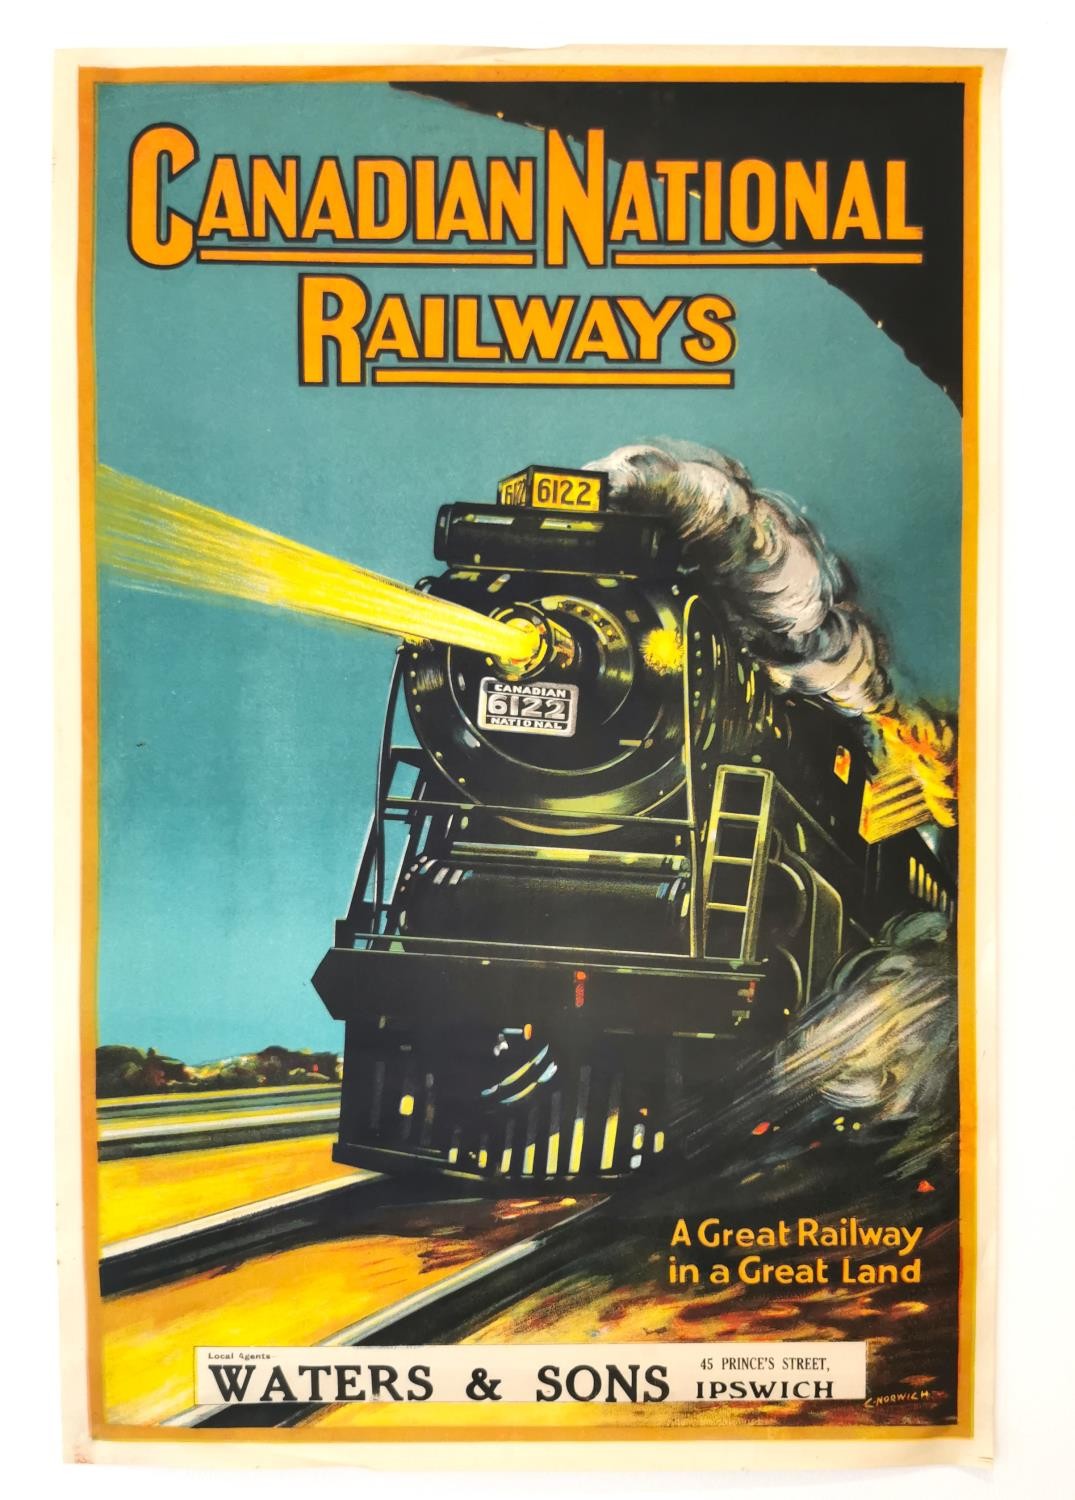 A vintage original travel poster for the Canadian National Railways by C. Norwich. Waters & Sons, - Image 2 of 6